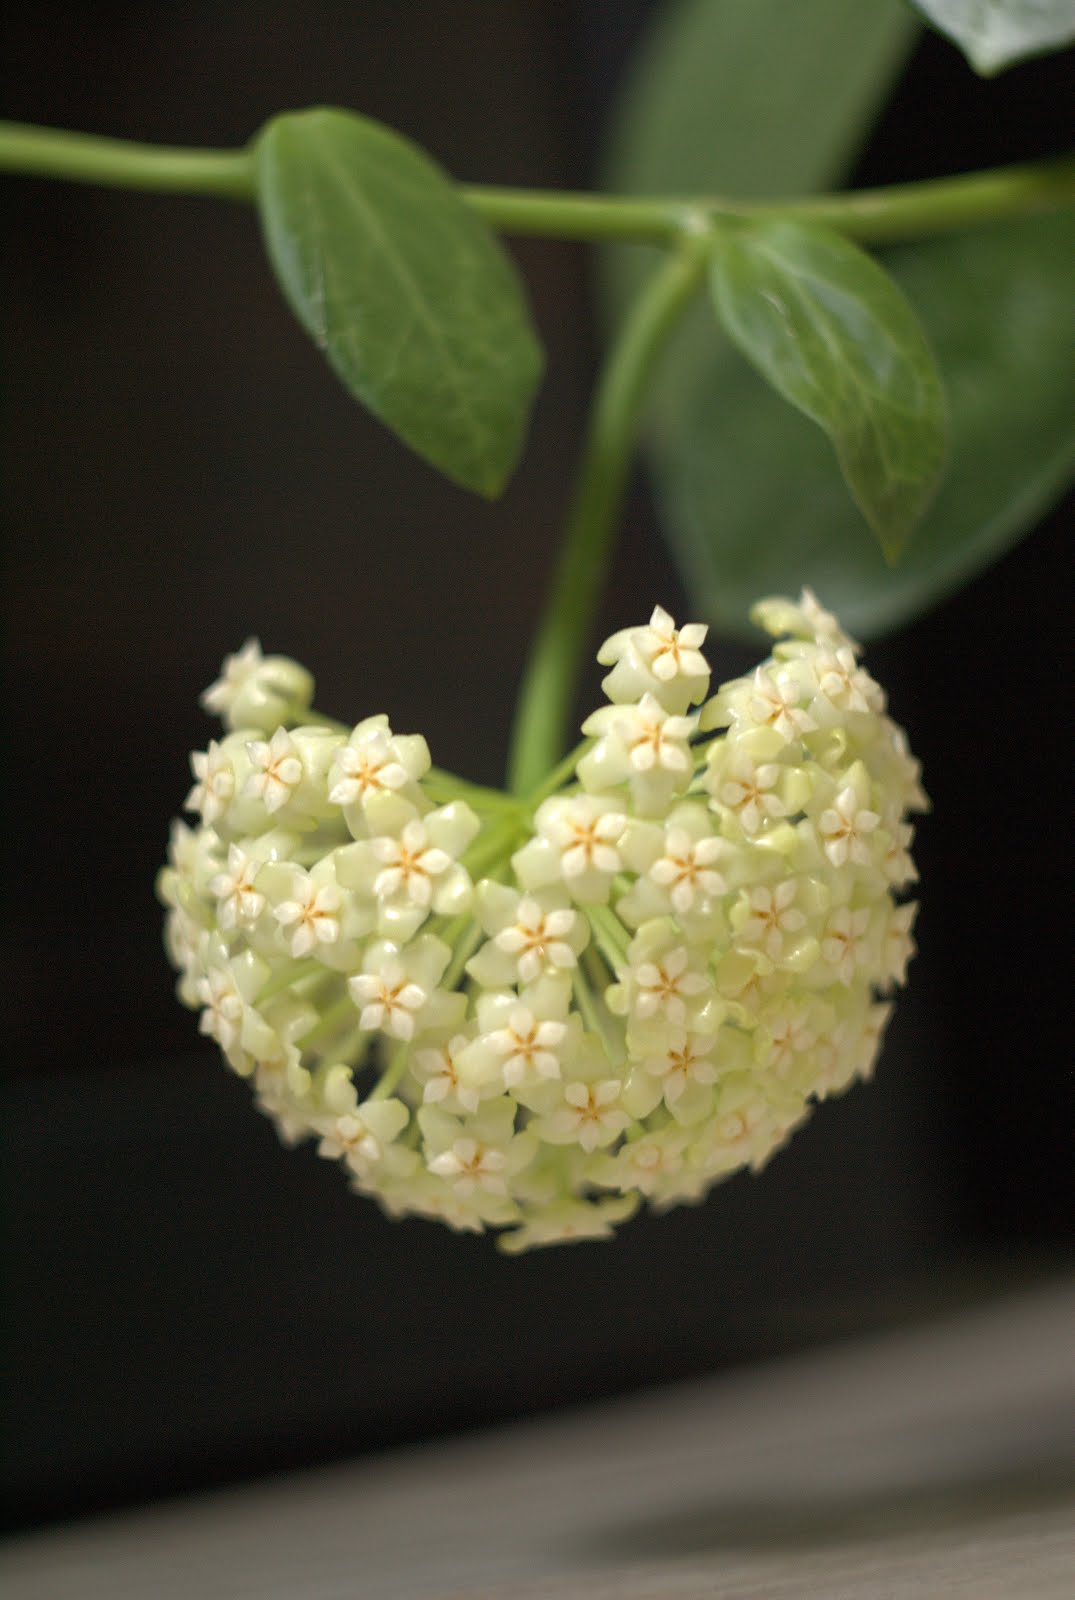 EPC-620 Hoya sp. Thick leaves with pure white flowers